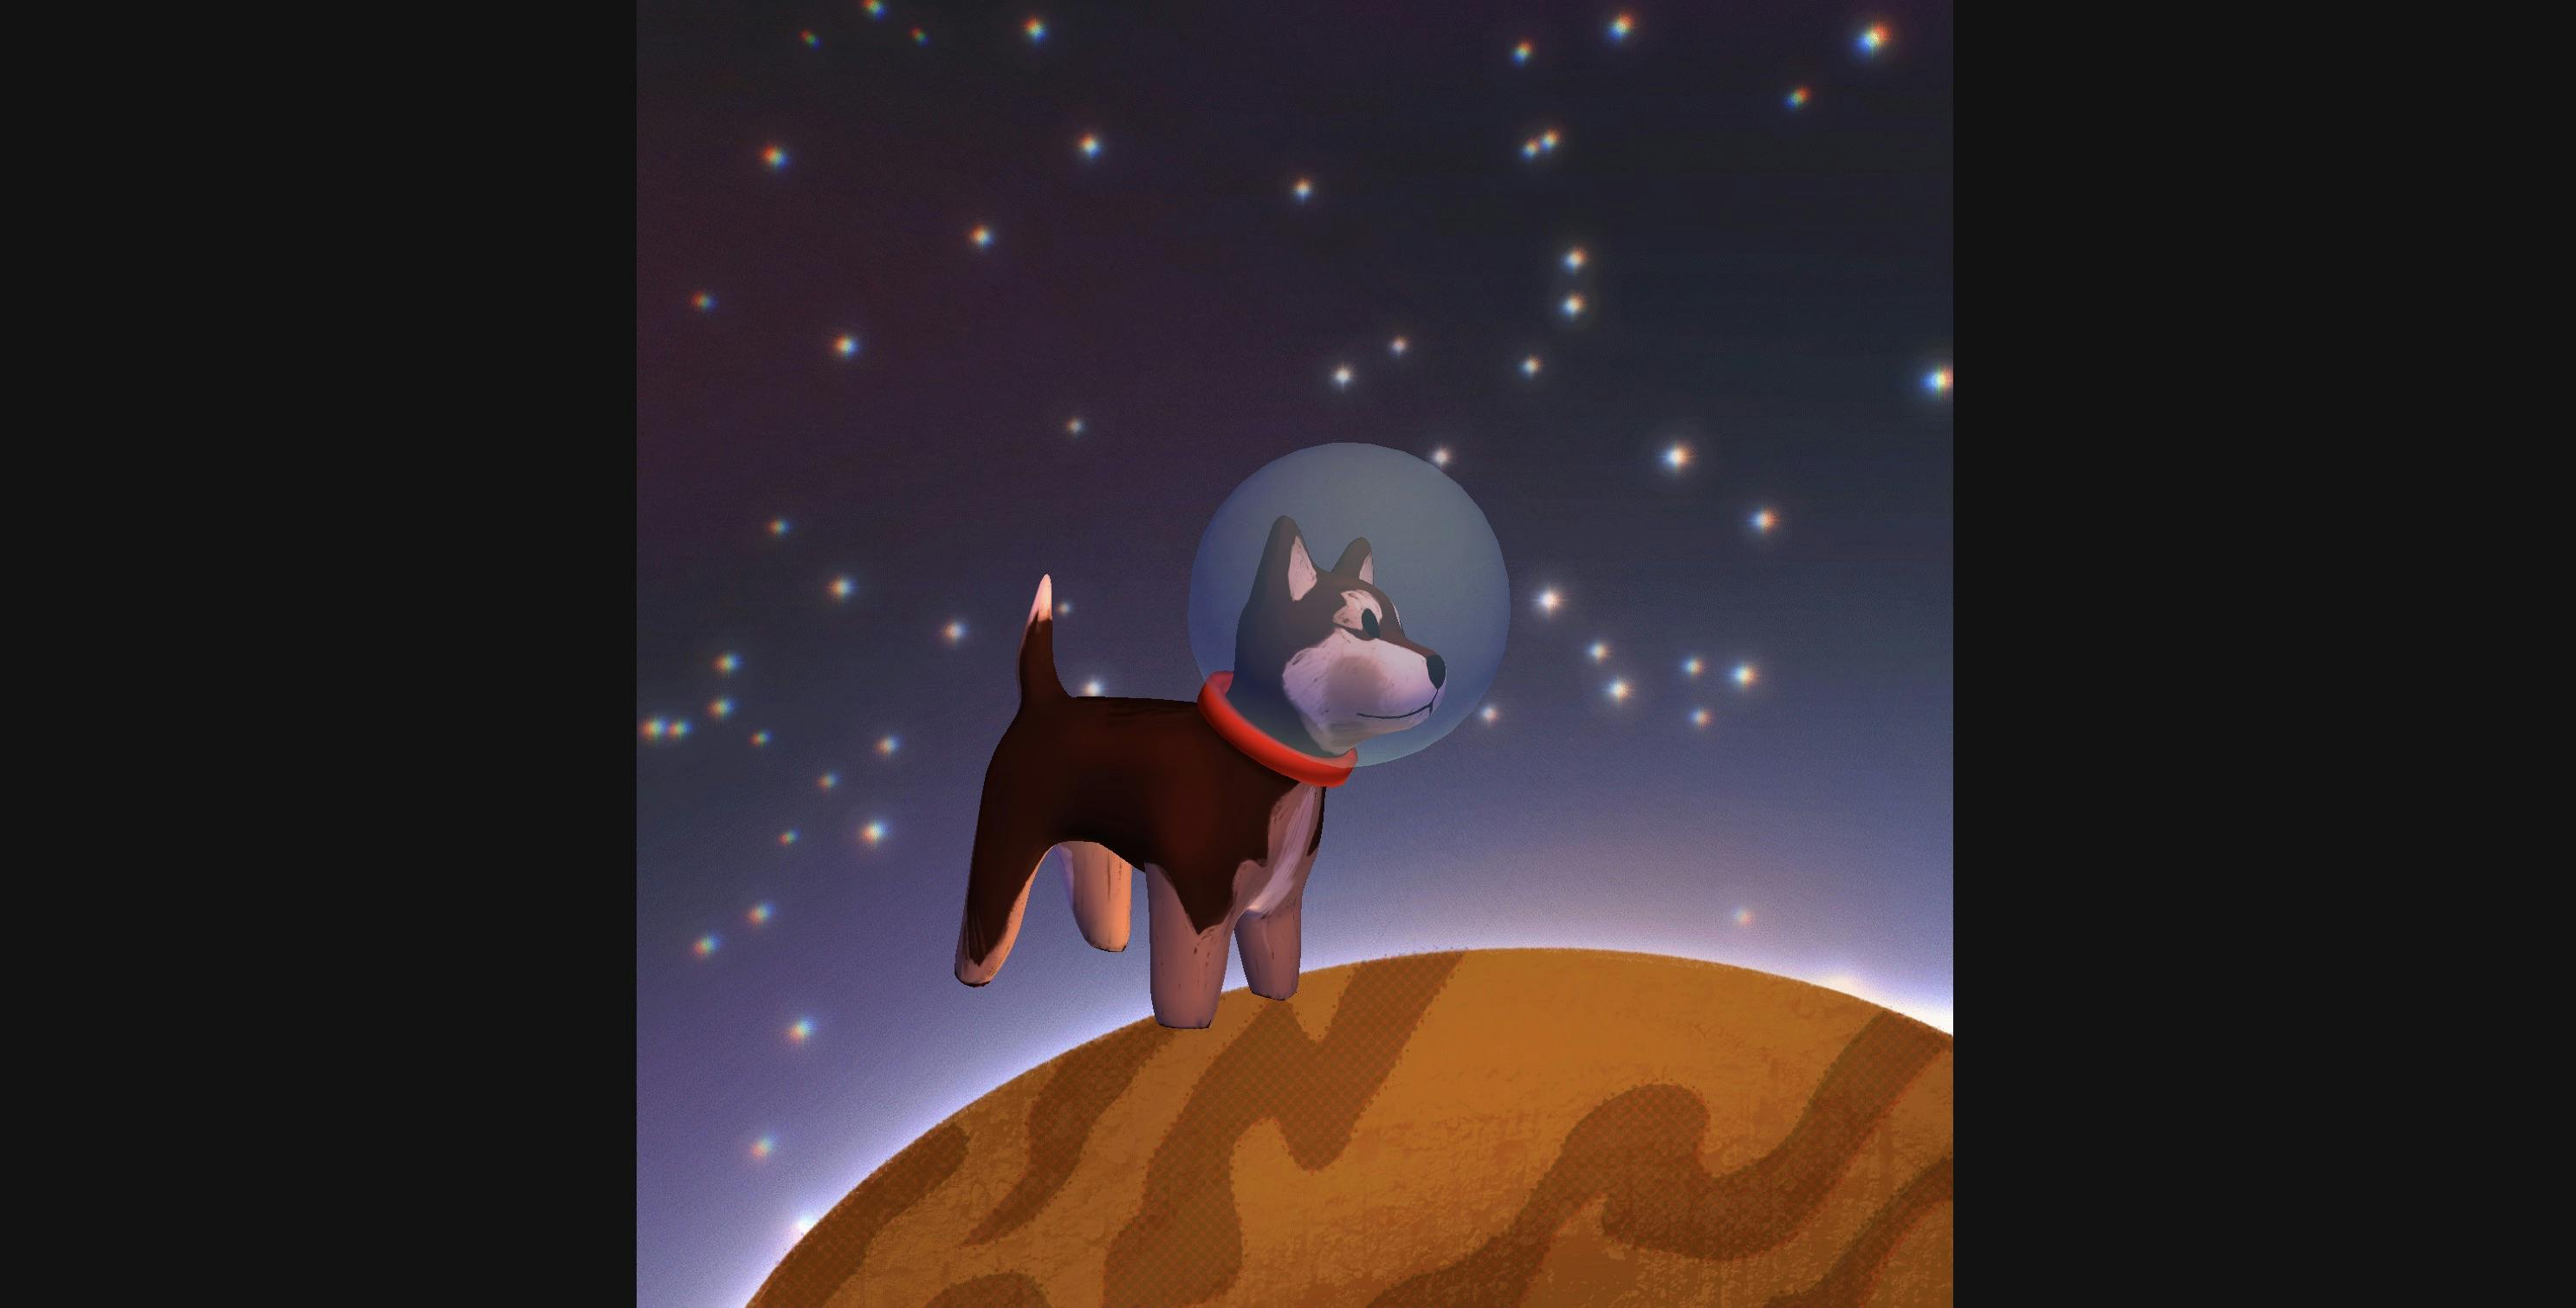 3D render of a cartoon dog with a space helmet floating against a starry background